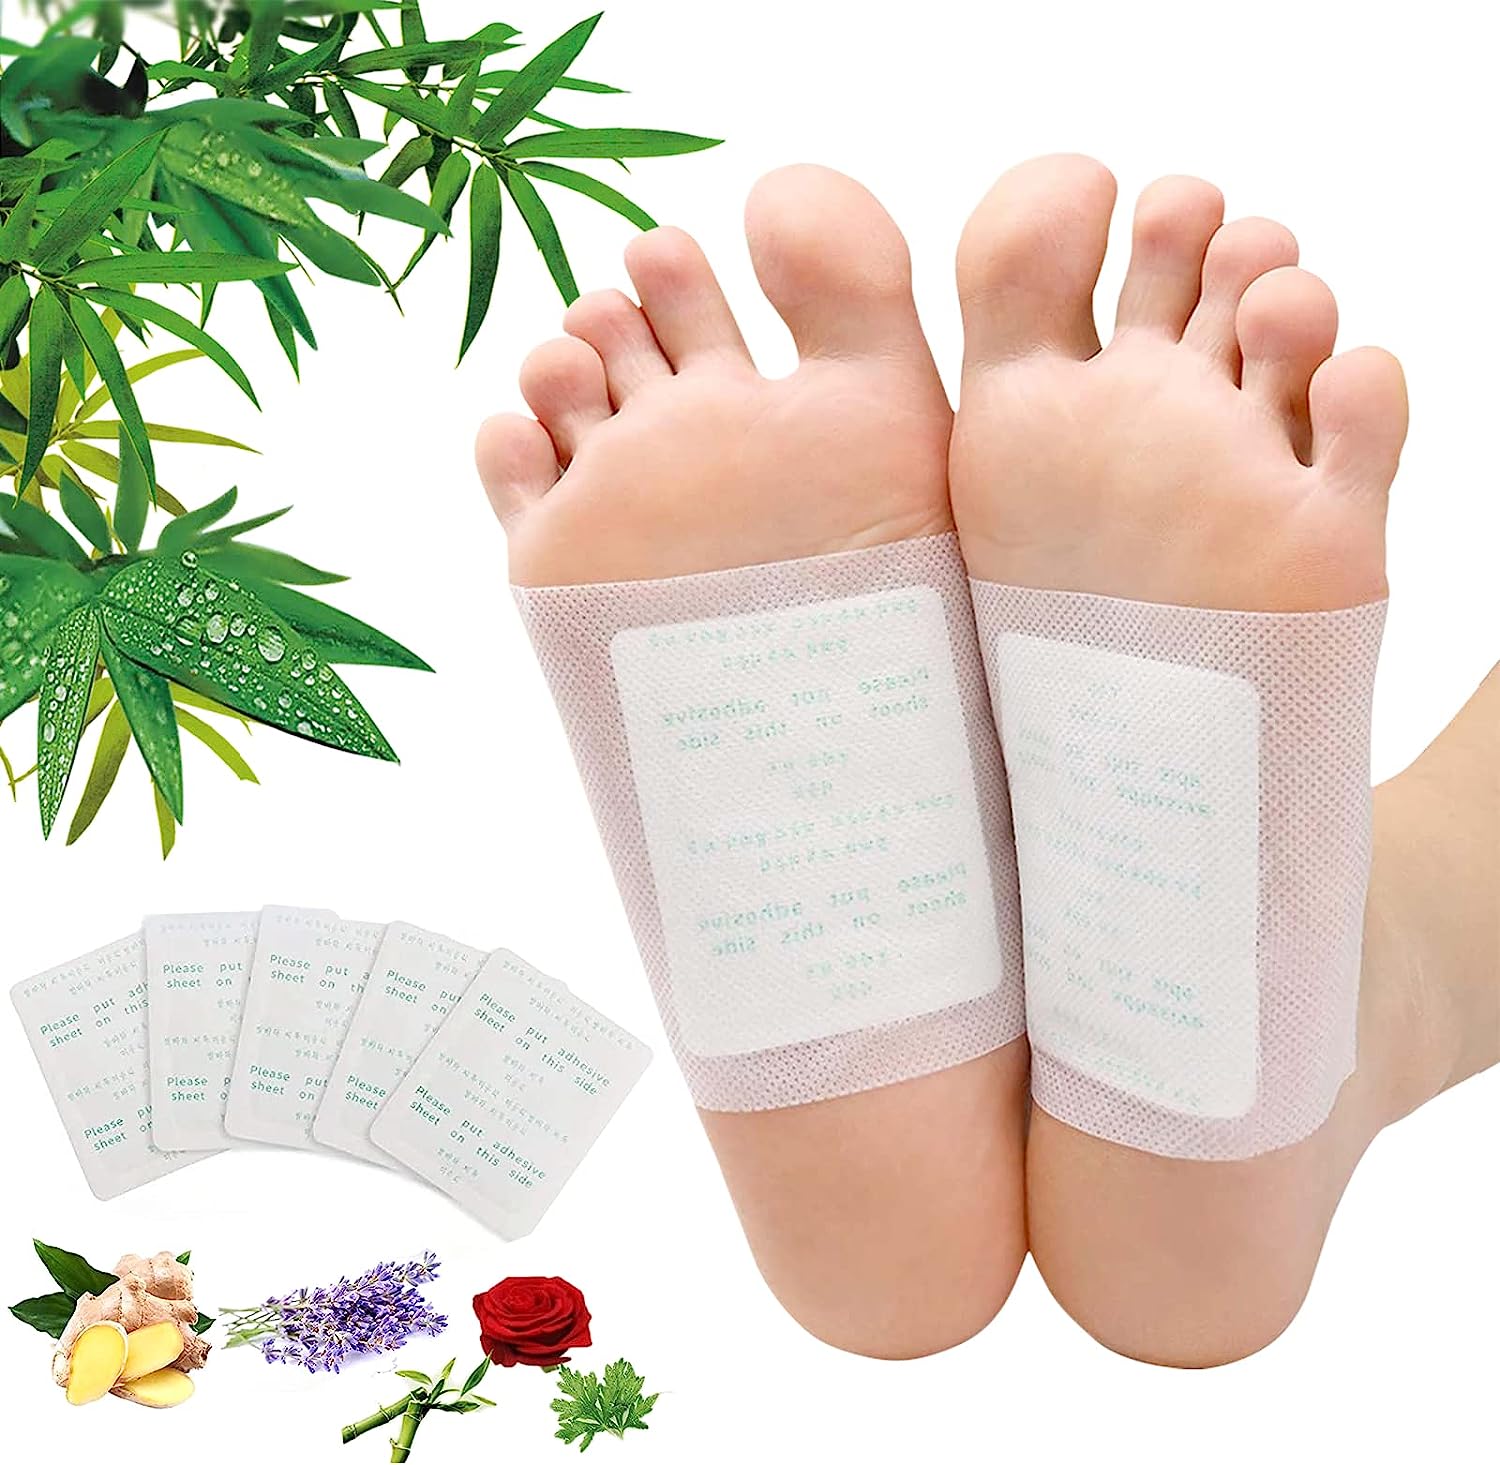 Foot Pads | 100Packs Relief Stress Ginger Foot Pads [...]